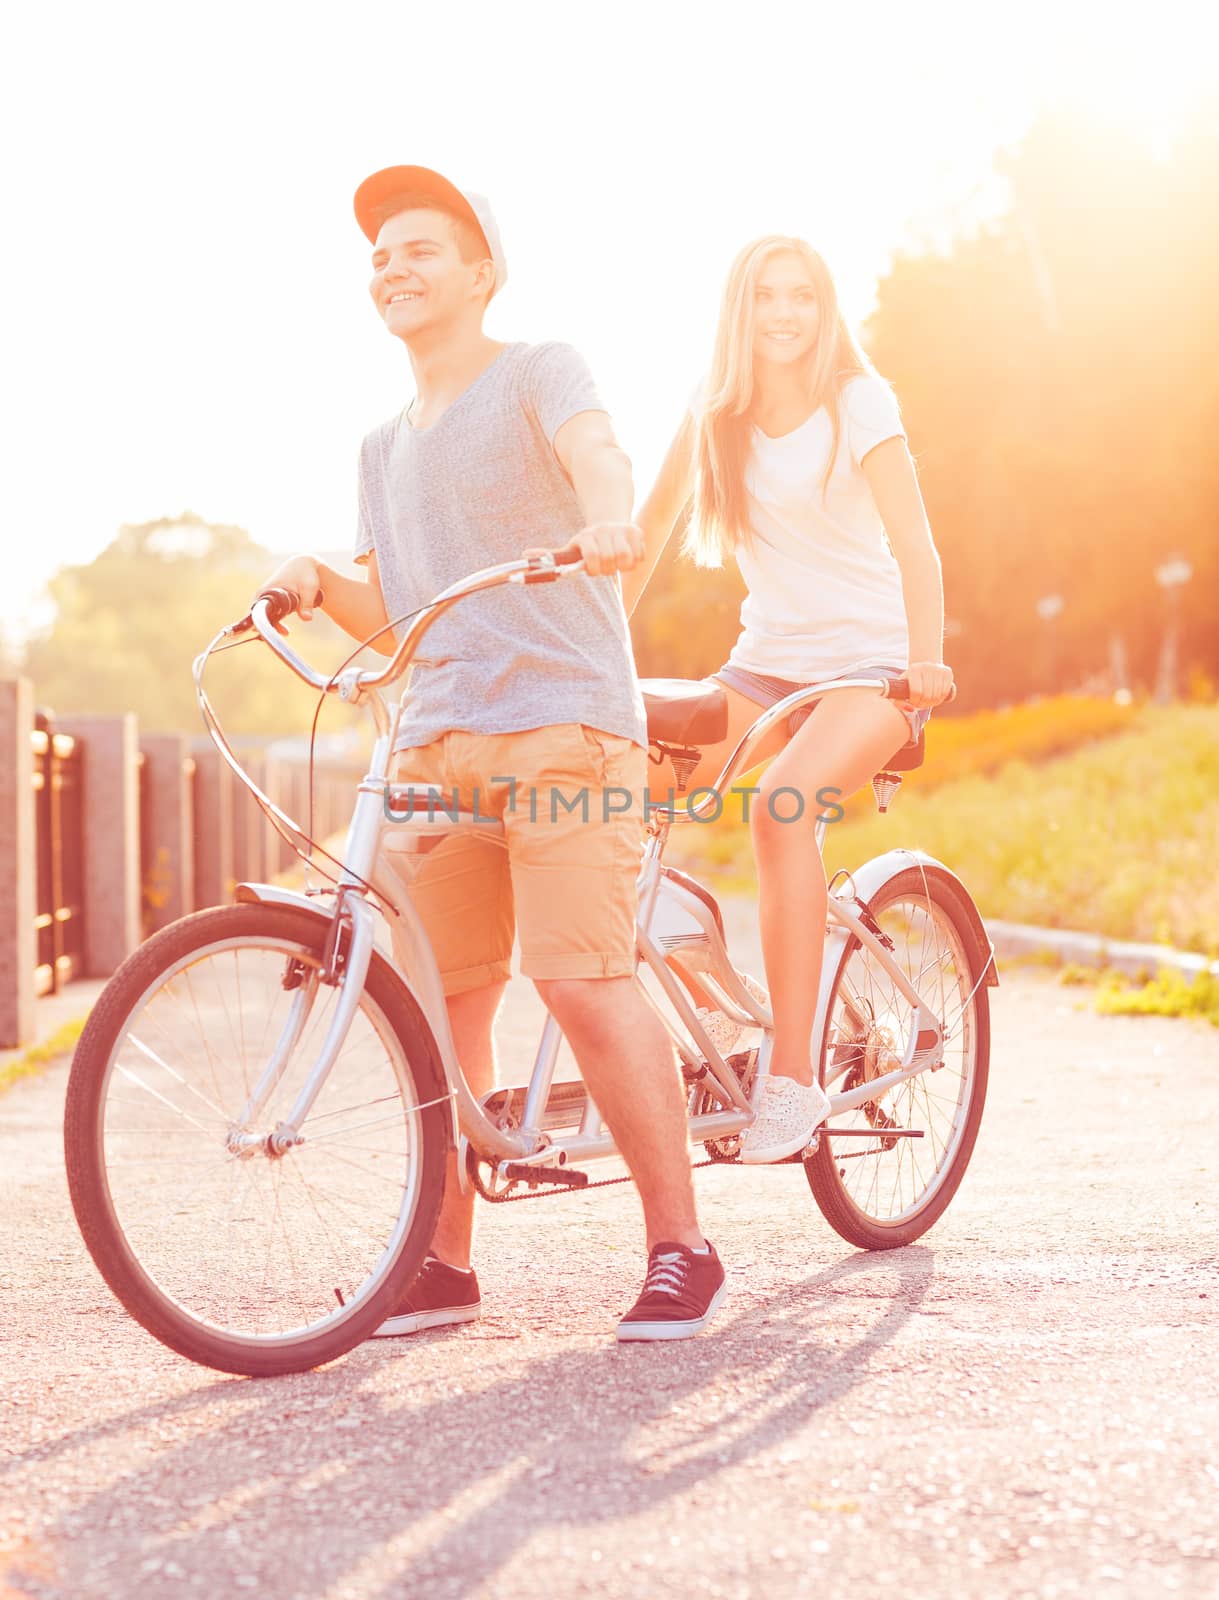 Happy couple riding a bicycle in the city street by vlad_star